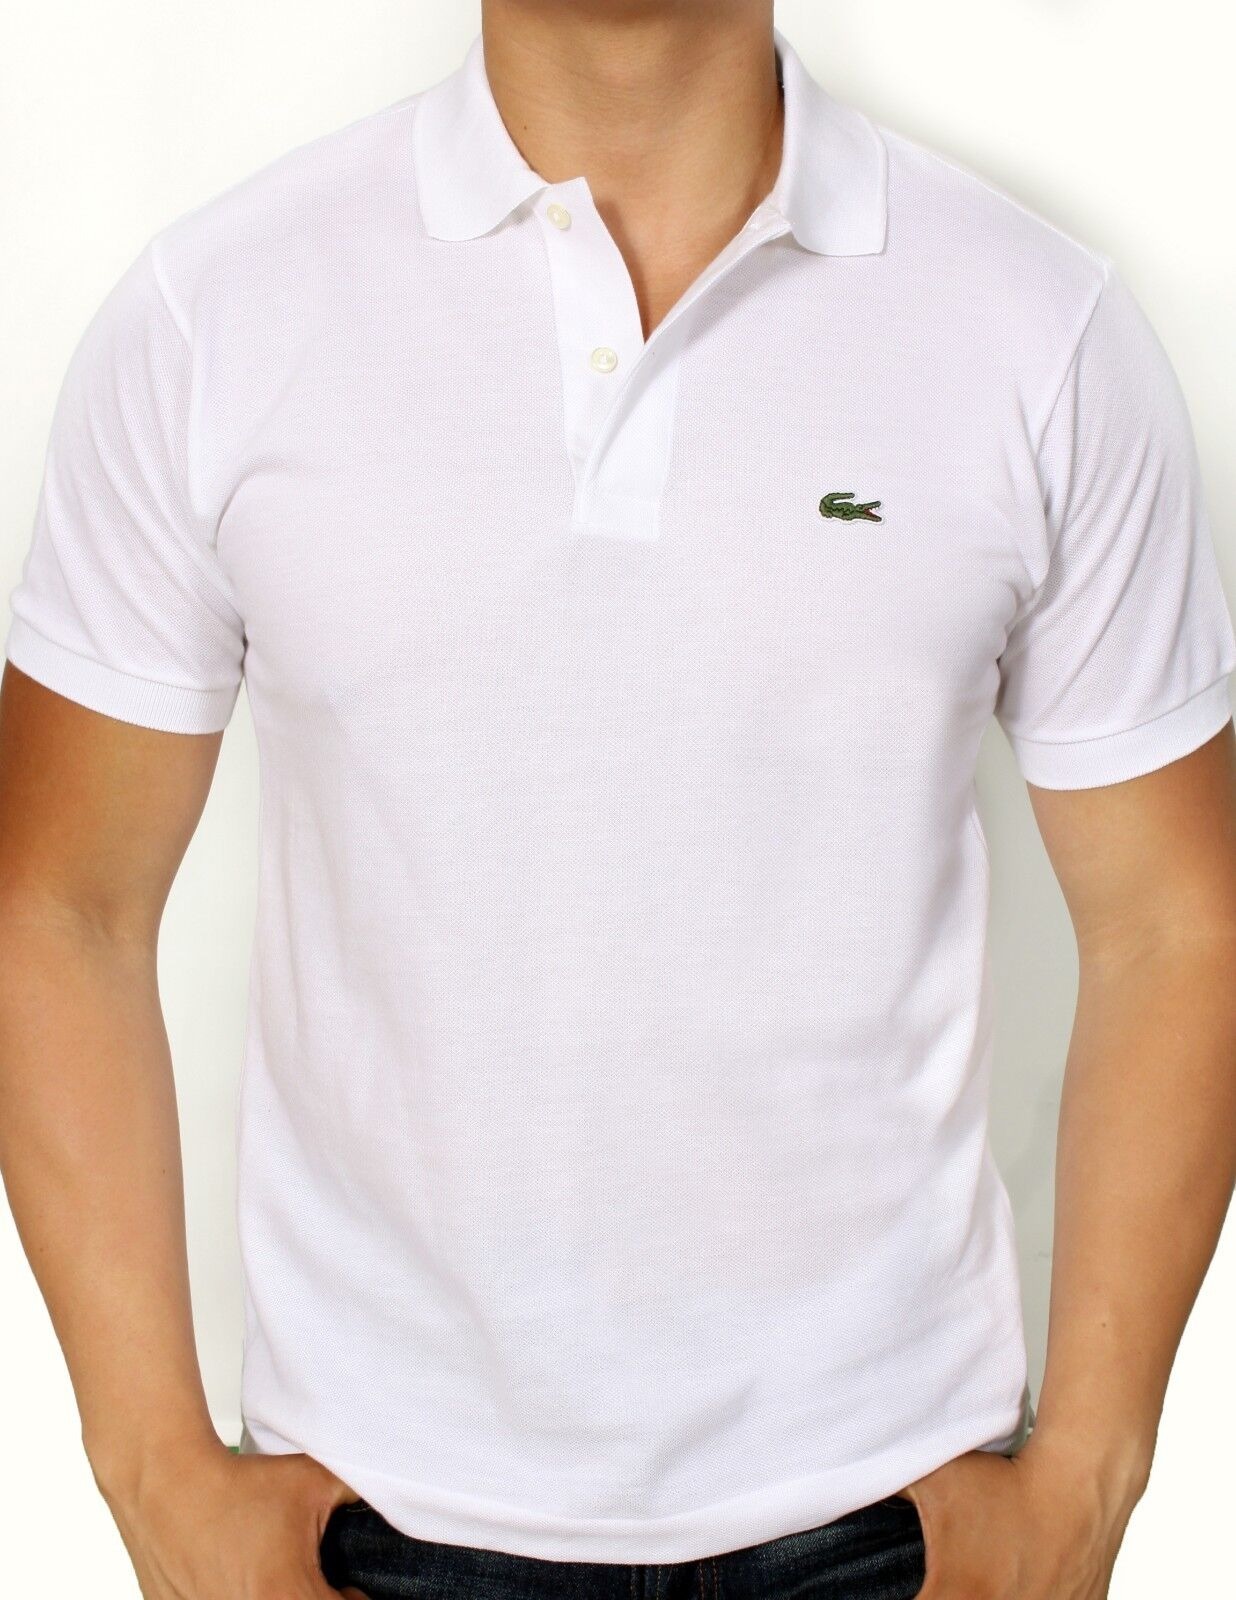 Lacoste WHITE Men's Classic Fit Short Sleeve Polo Shirt, US 2X-Large - image 1 of 4